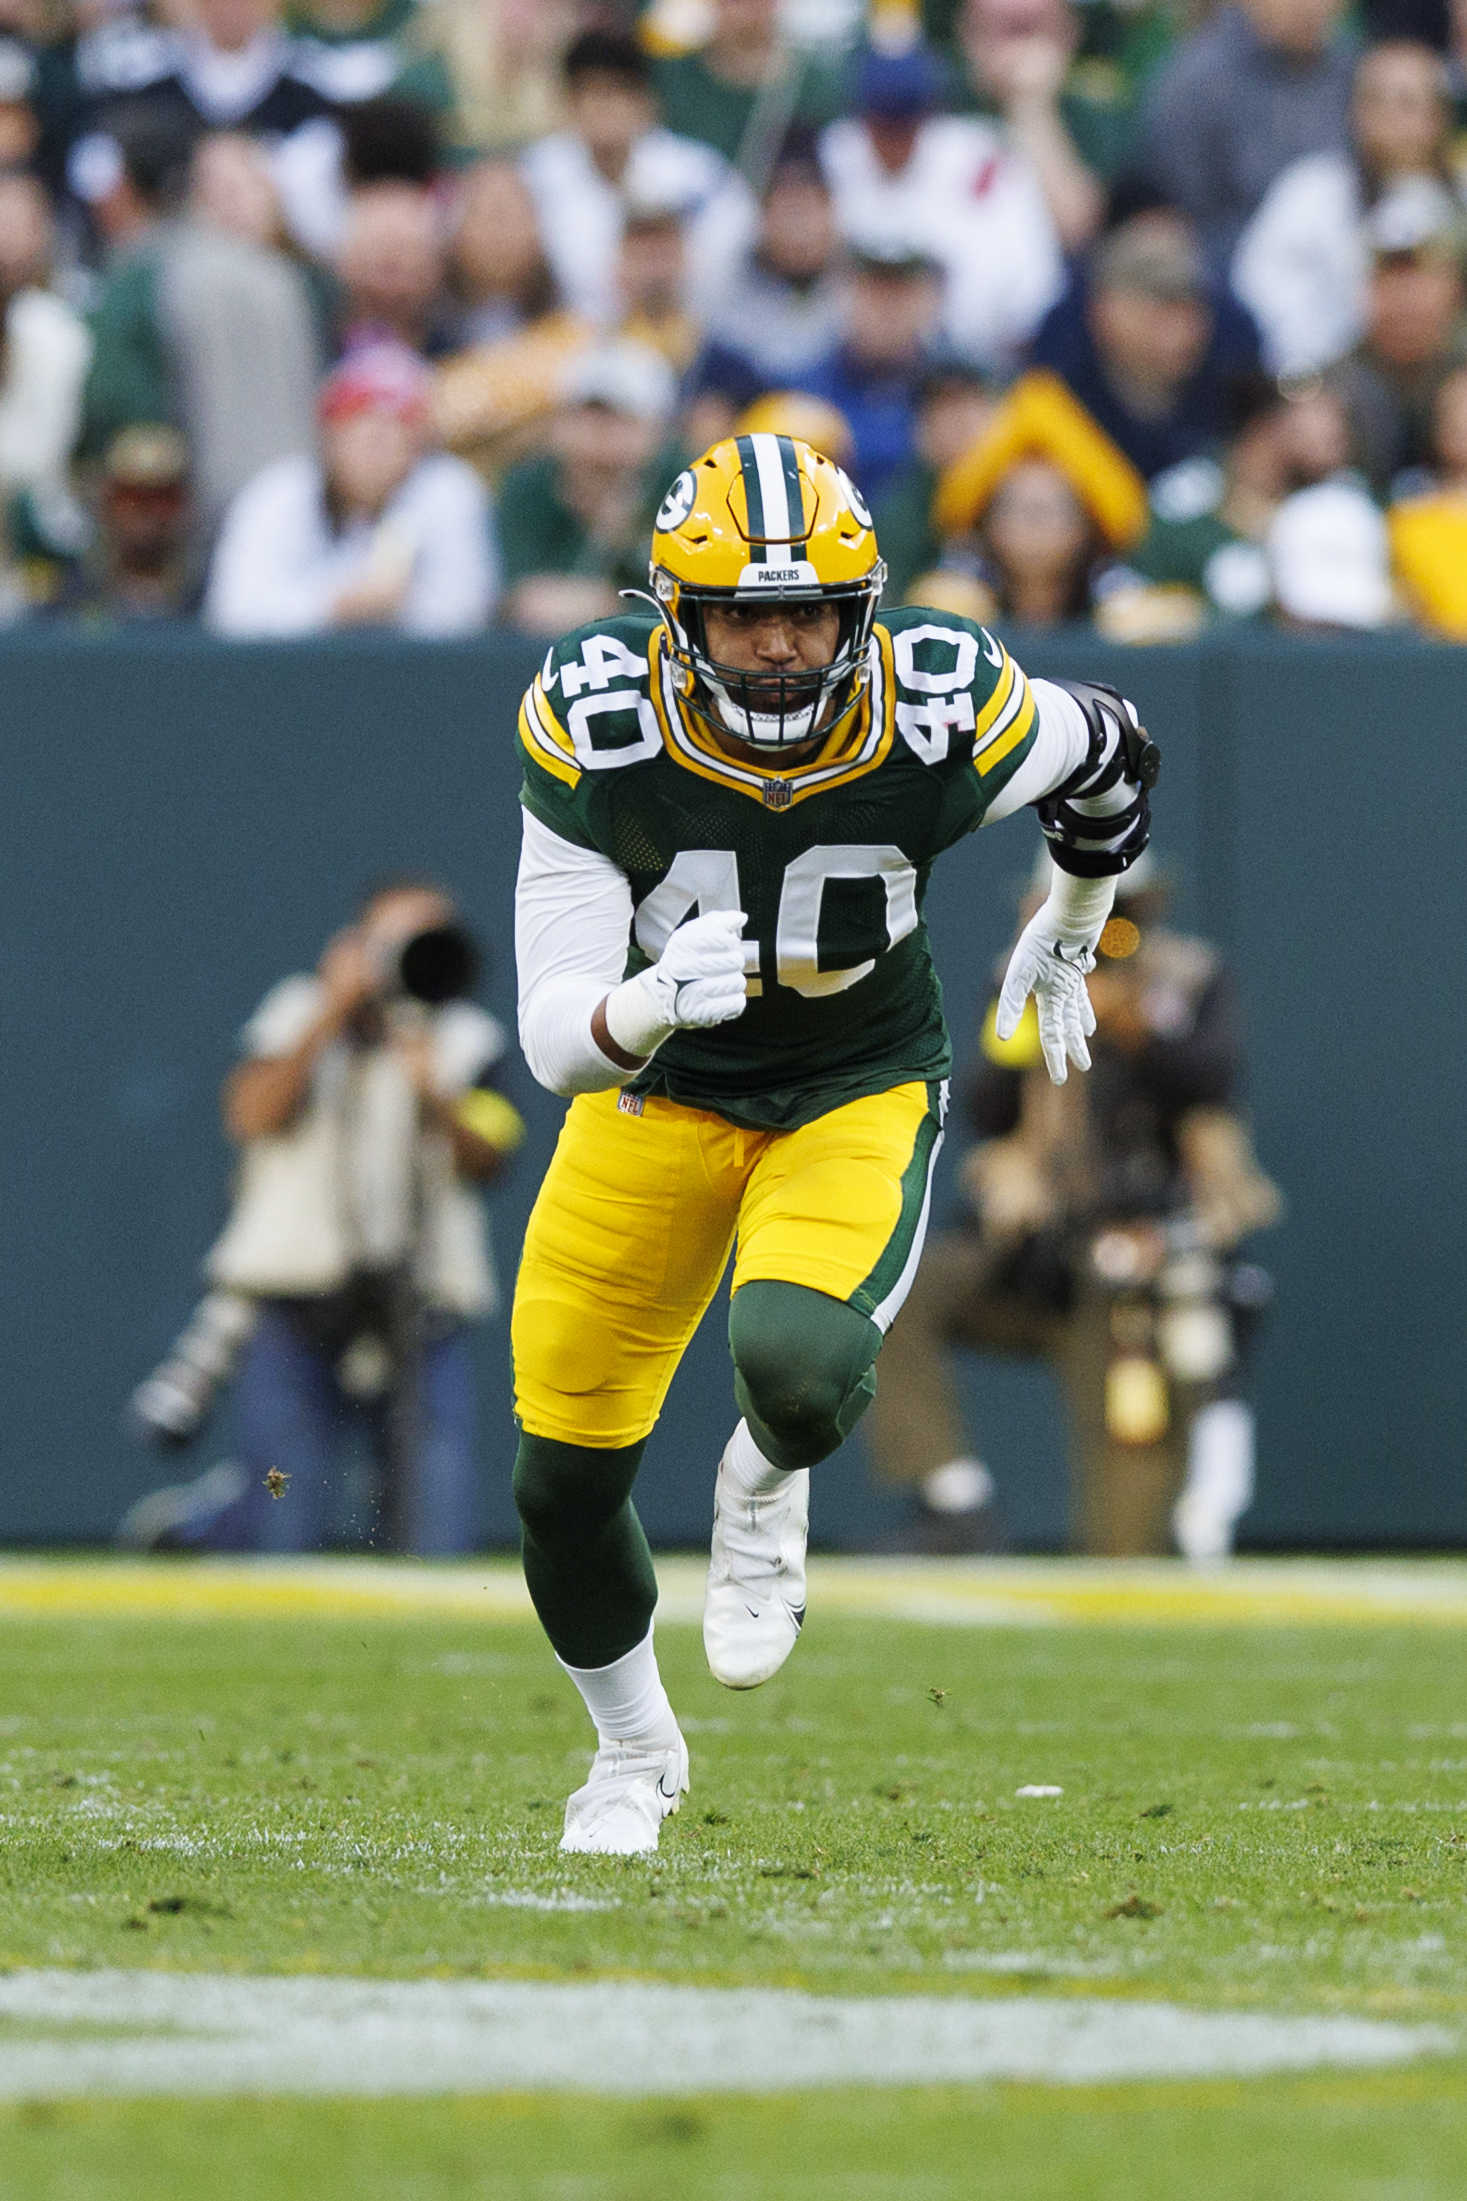 Oct 2, 2022; Green Bay, Wisconsin, USA; Green Bay Packers linebacker Tipa Galeai (40) during the game against the New England Patriots at Lambeau Field. Mandatory Credit: Jeff Hanisch-USA TODAY Sports